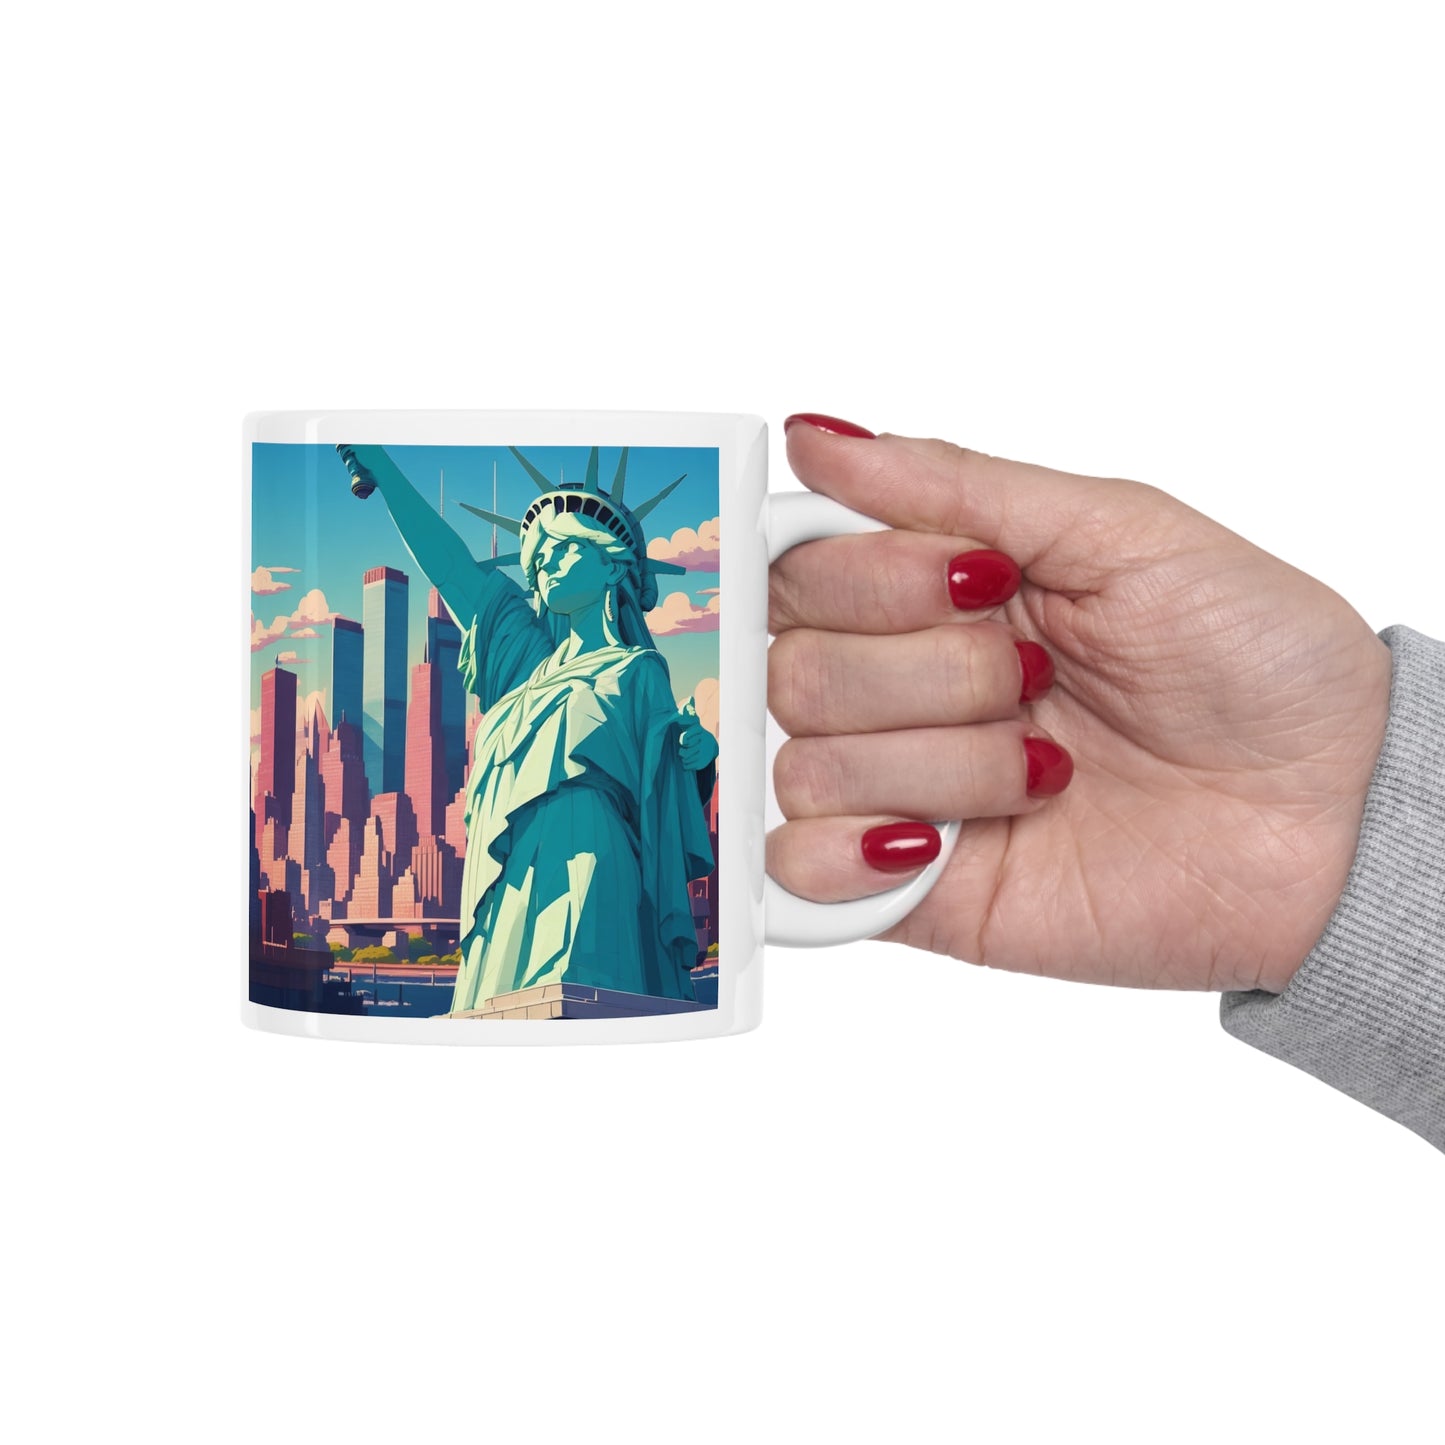 Statue of Liberty | Lady Liberty | Patriotic Gift | NYC | New York City | Independence Day | July 4th | America | Freedom | Mug 11oz